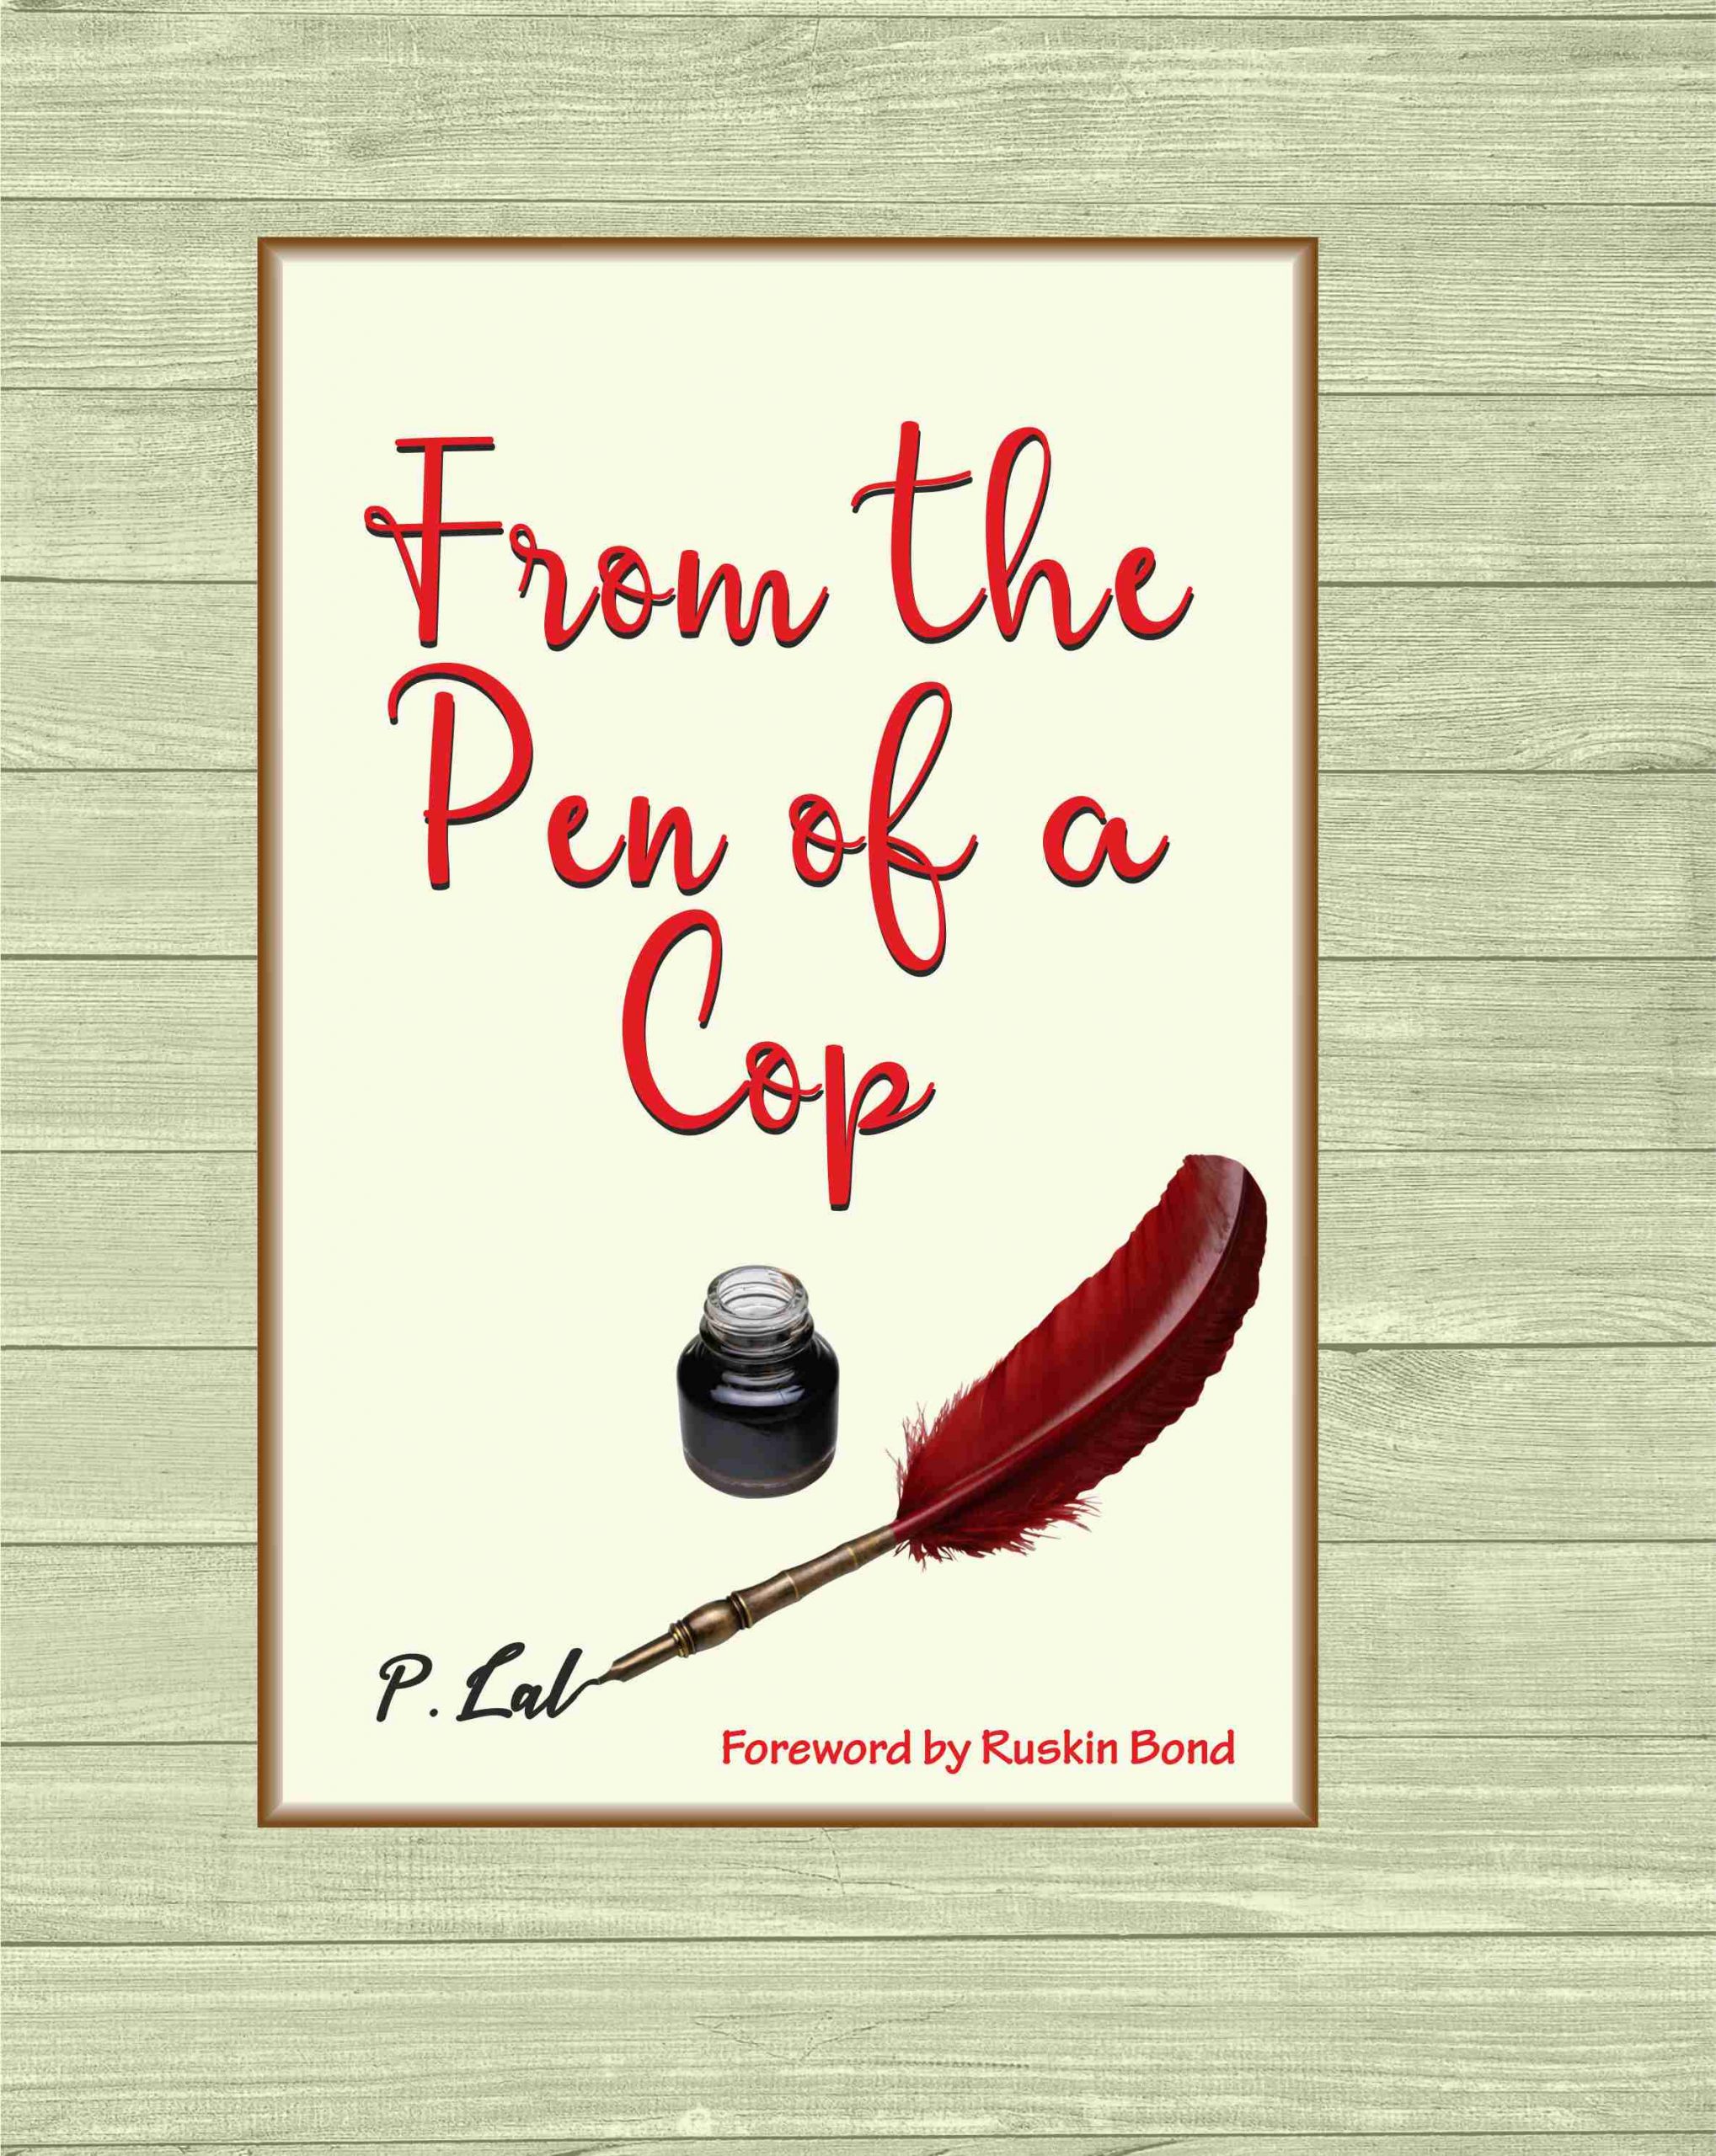 From the Pen of a Cop (Foreword by Ruskin Bond) by P. Lal.